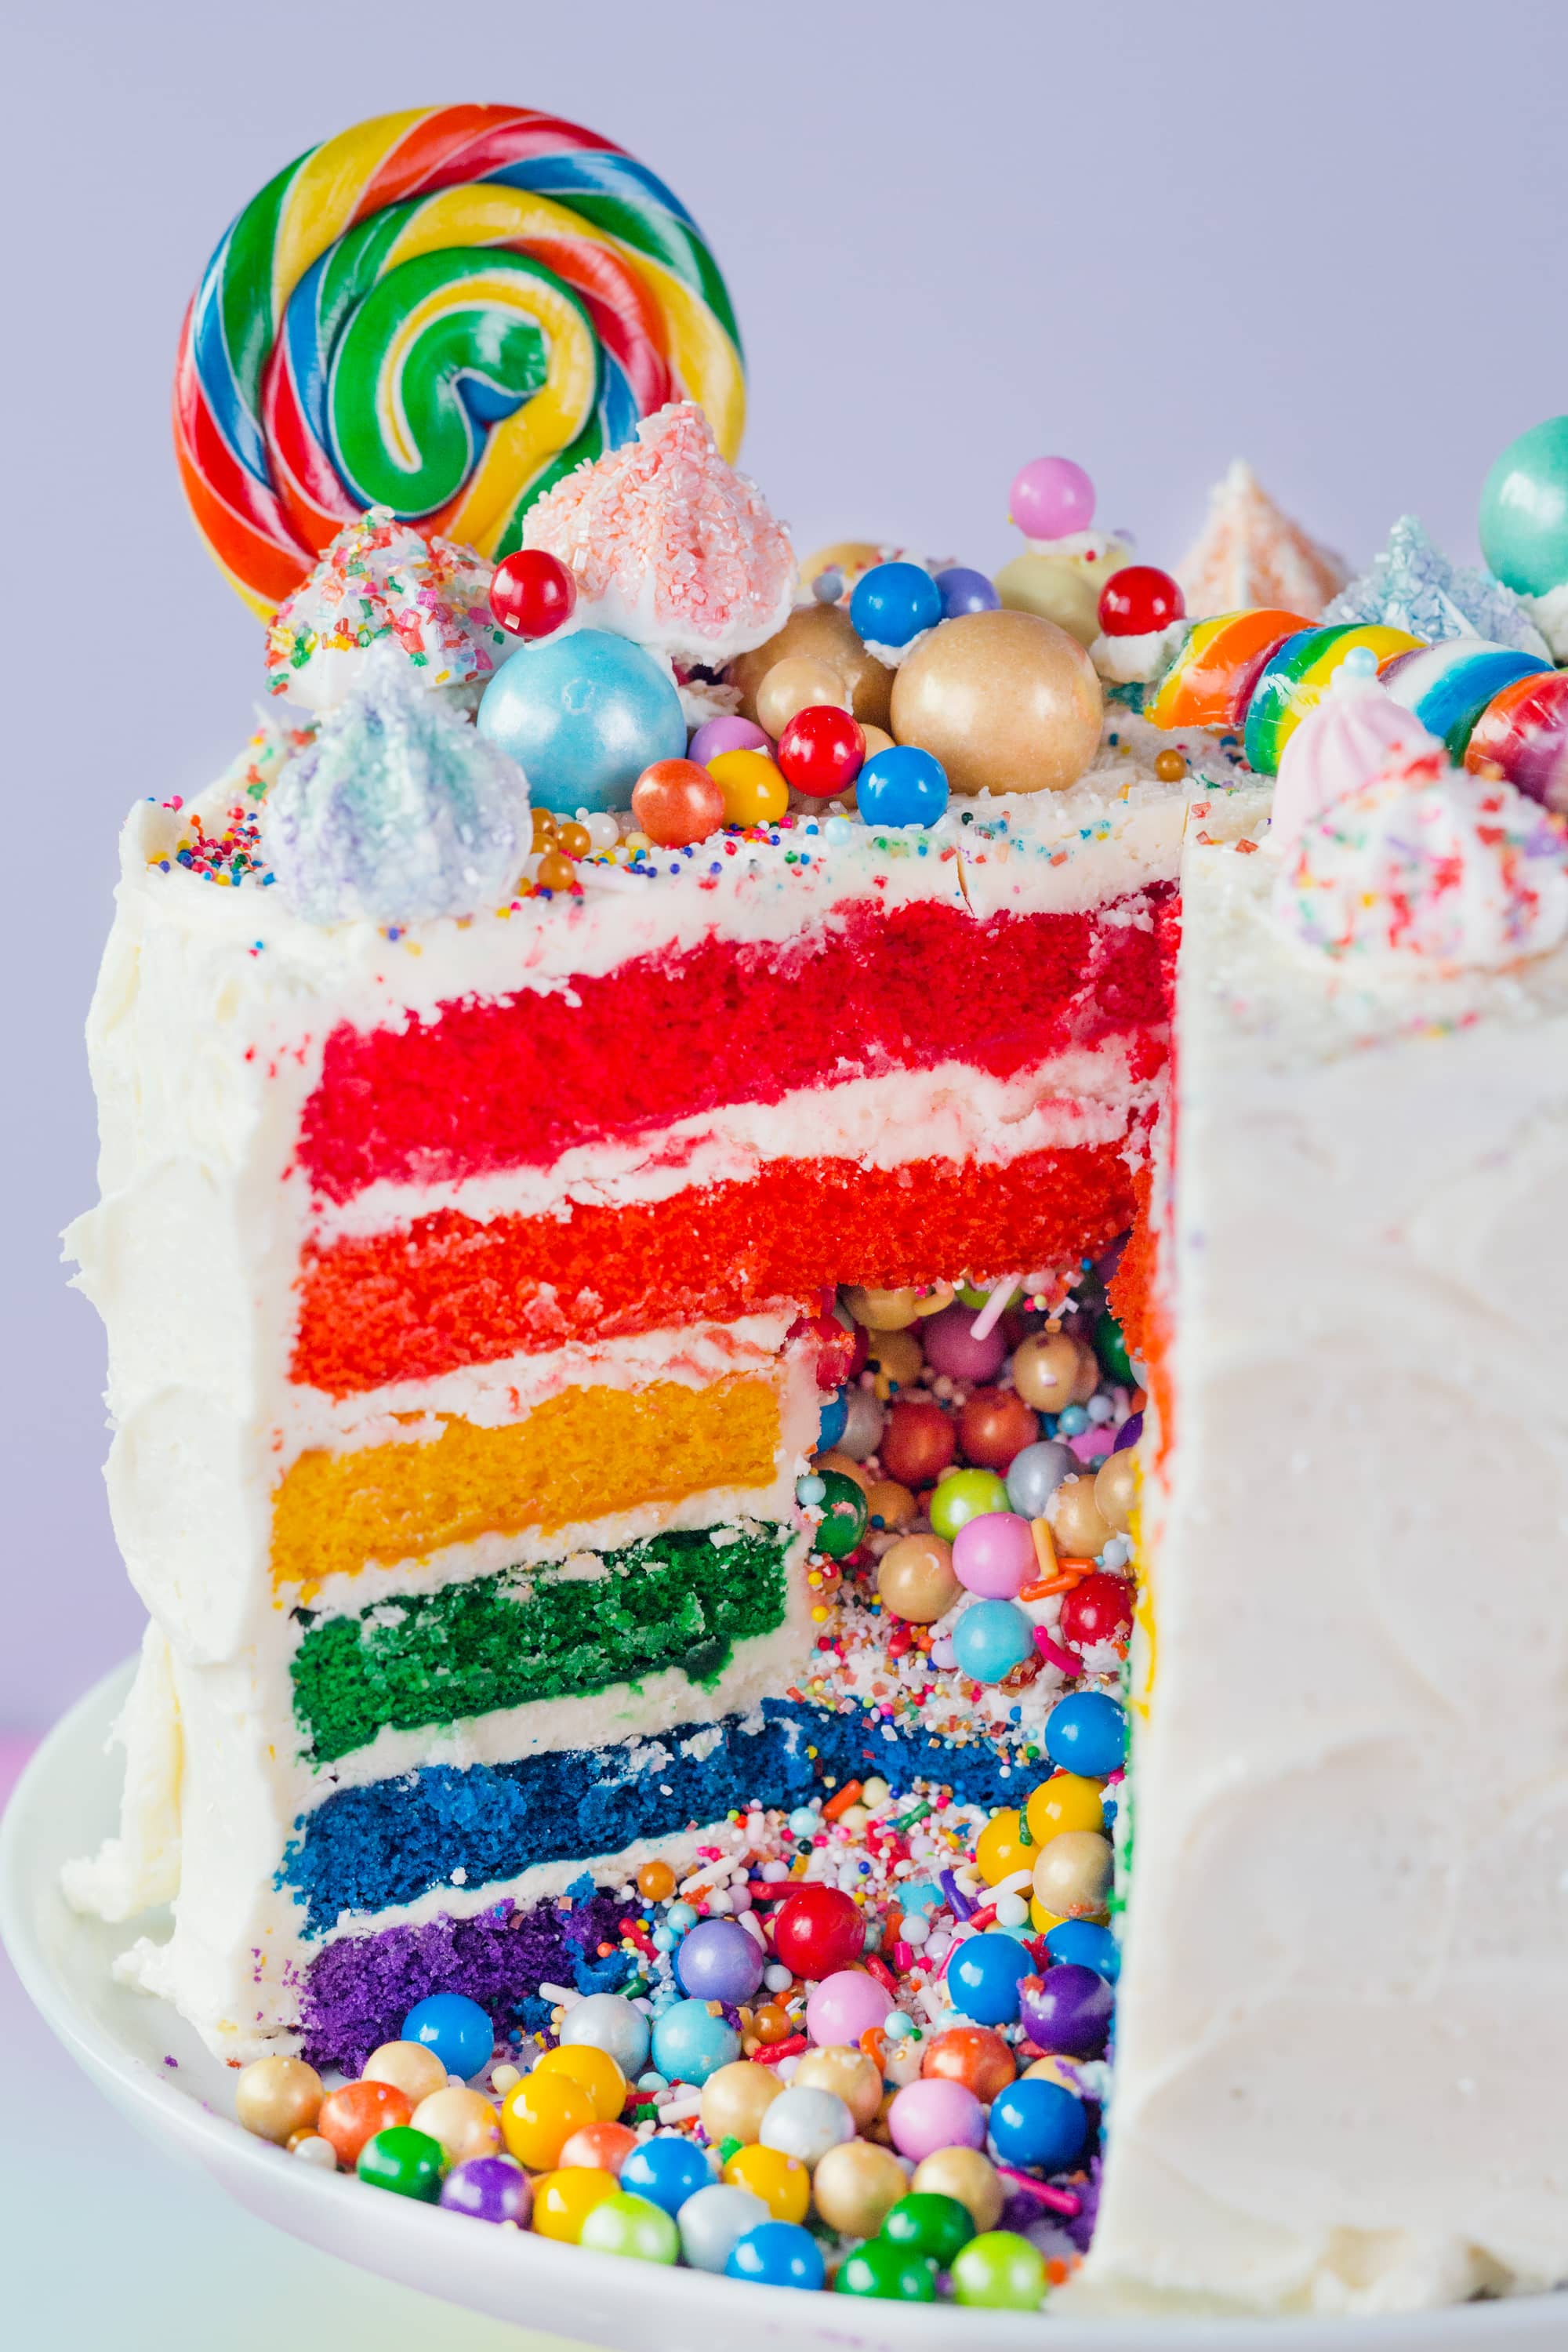 How To Make a Rainbow Layer Cake with a Candy Surprise Inside | Kitchn